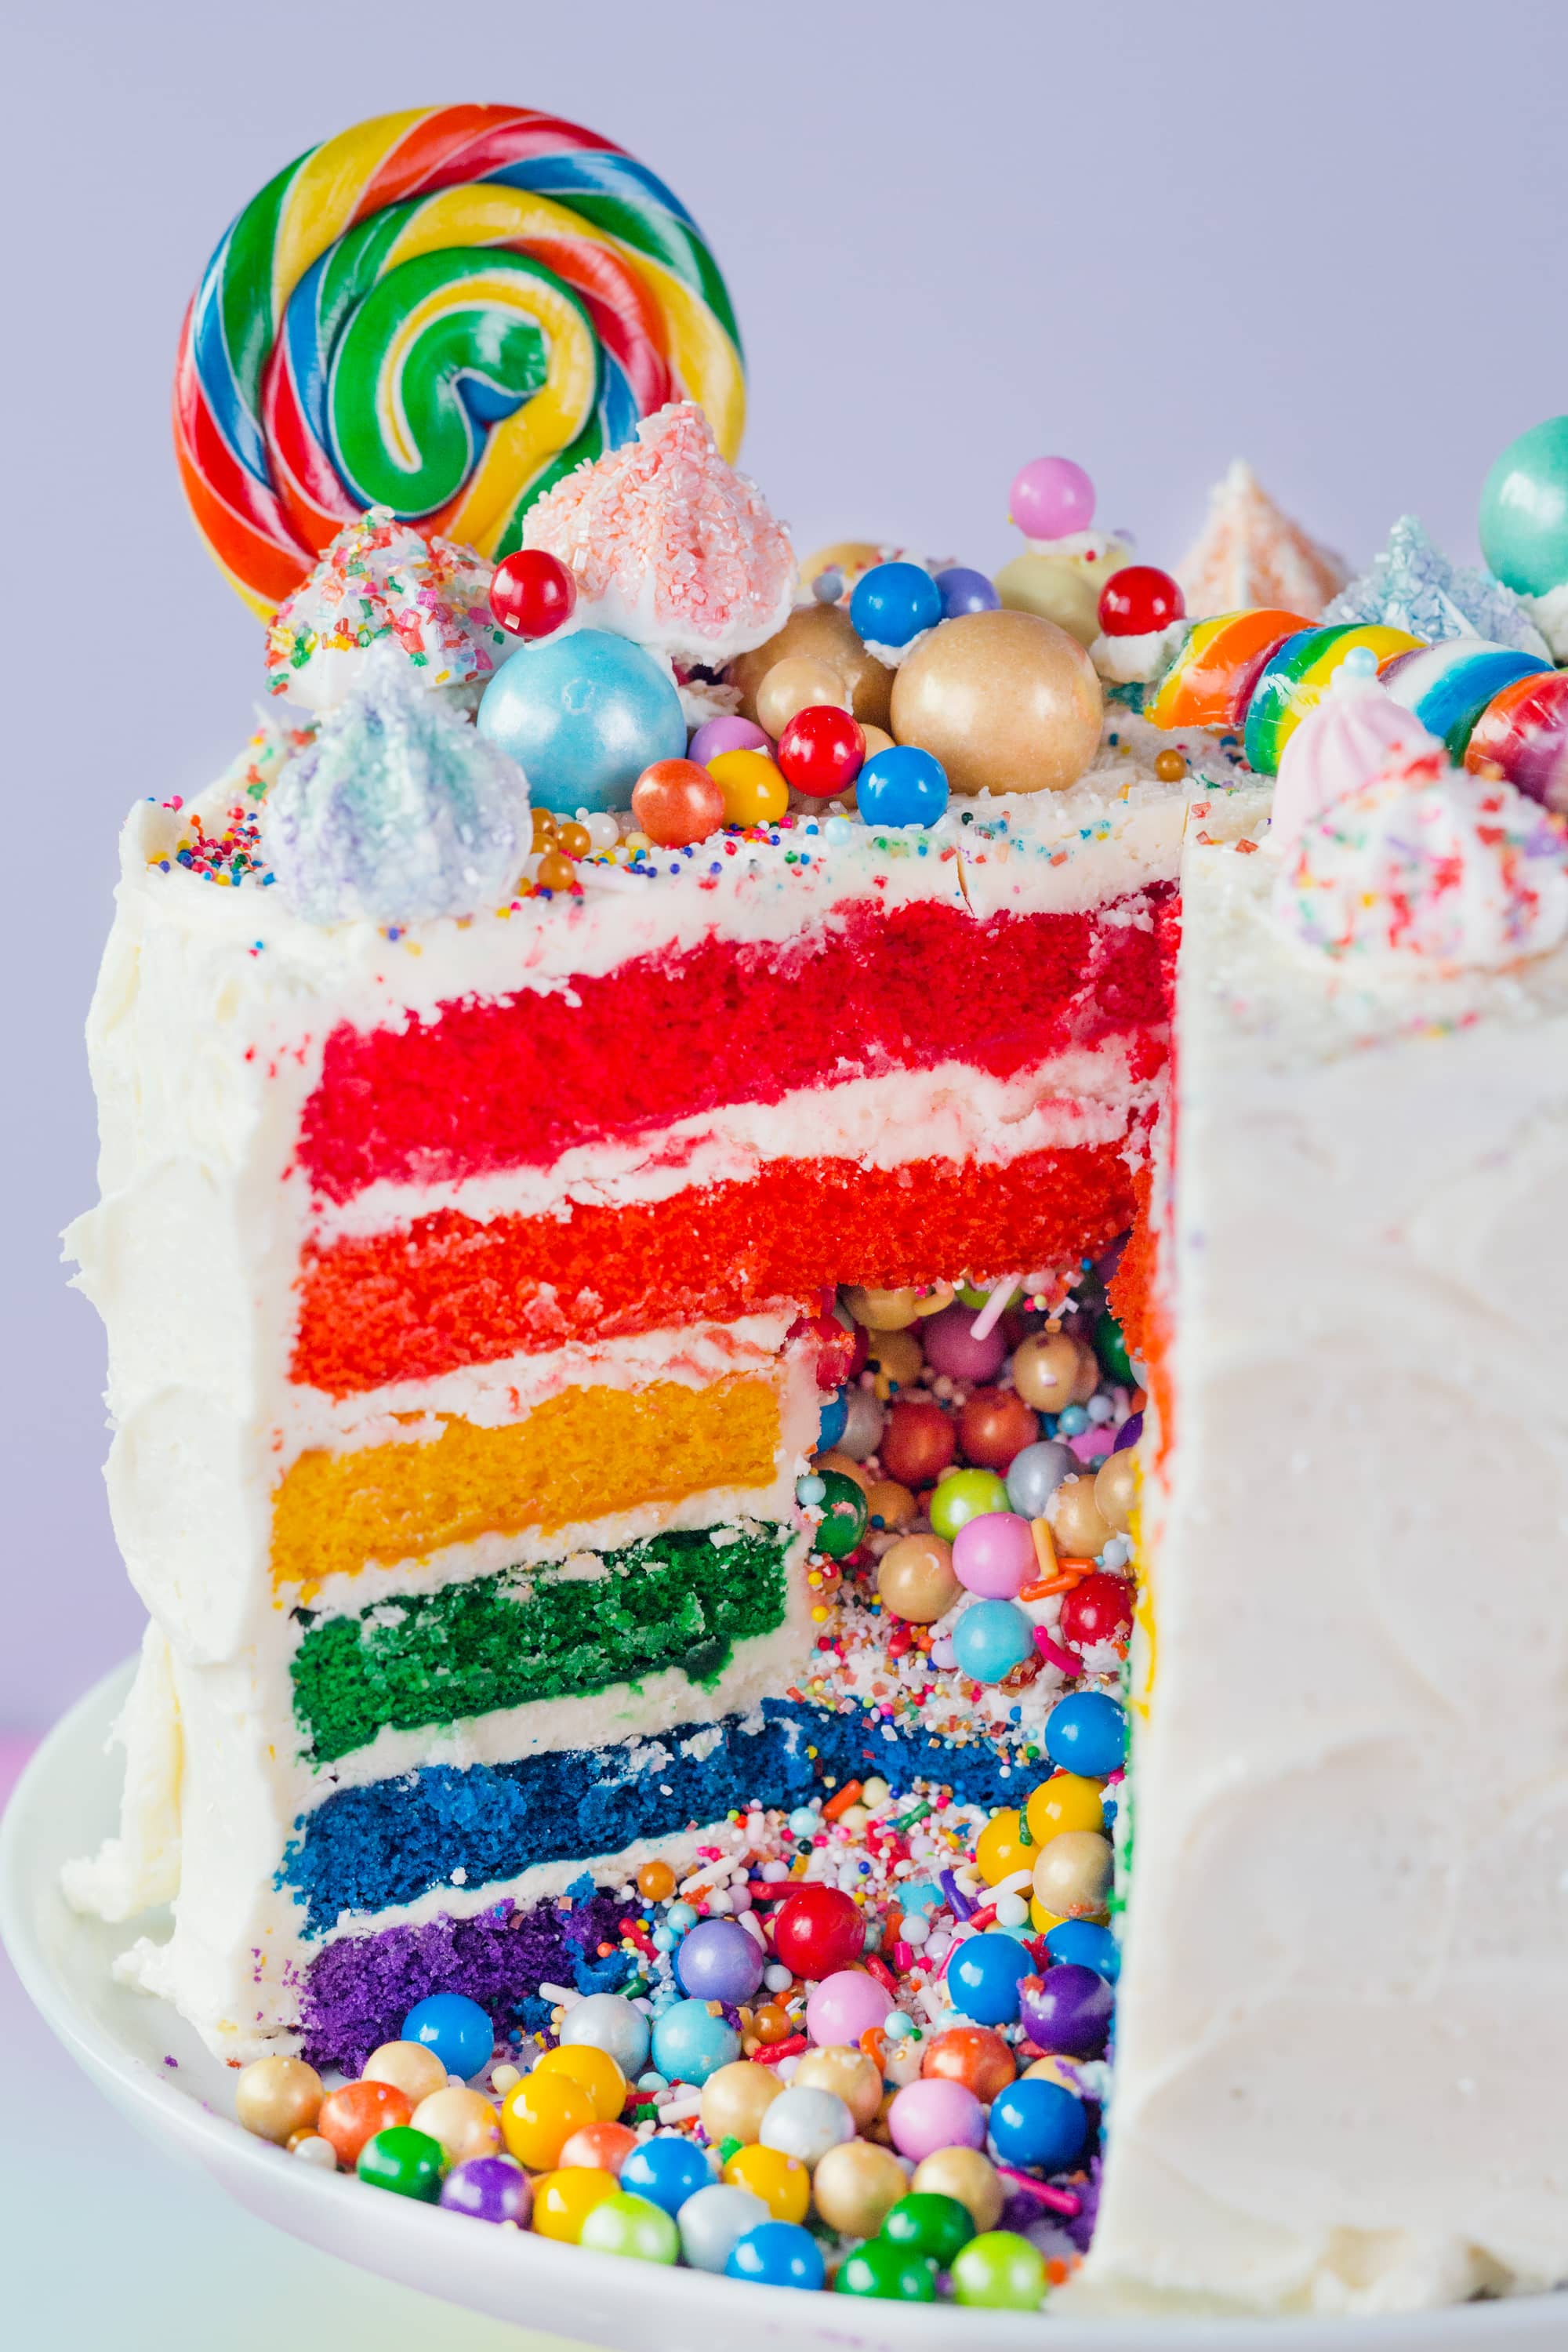 How To Make a Rainbow Layer Cake with a Candy Surprise Inside | Kitchn